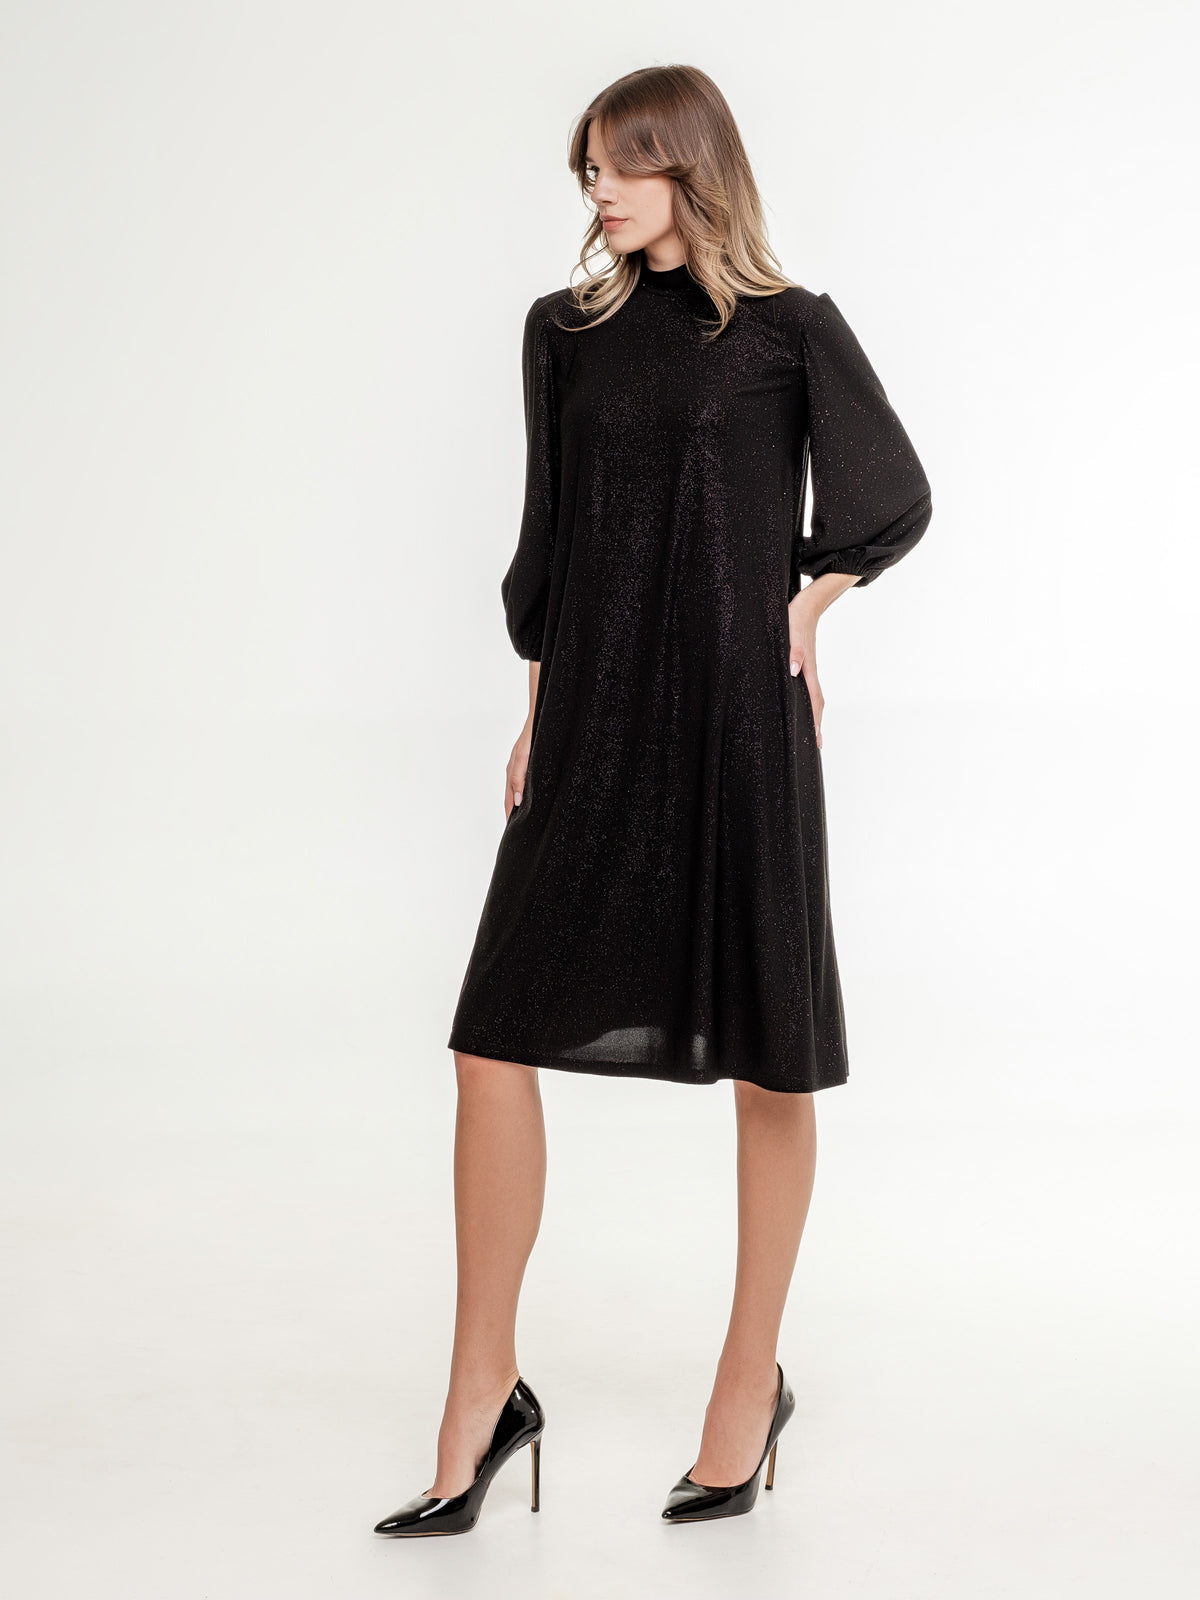 short_glossy_black_dress_with_high_neck_line 3/4 sleeves side view model